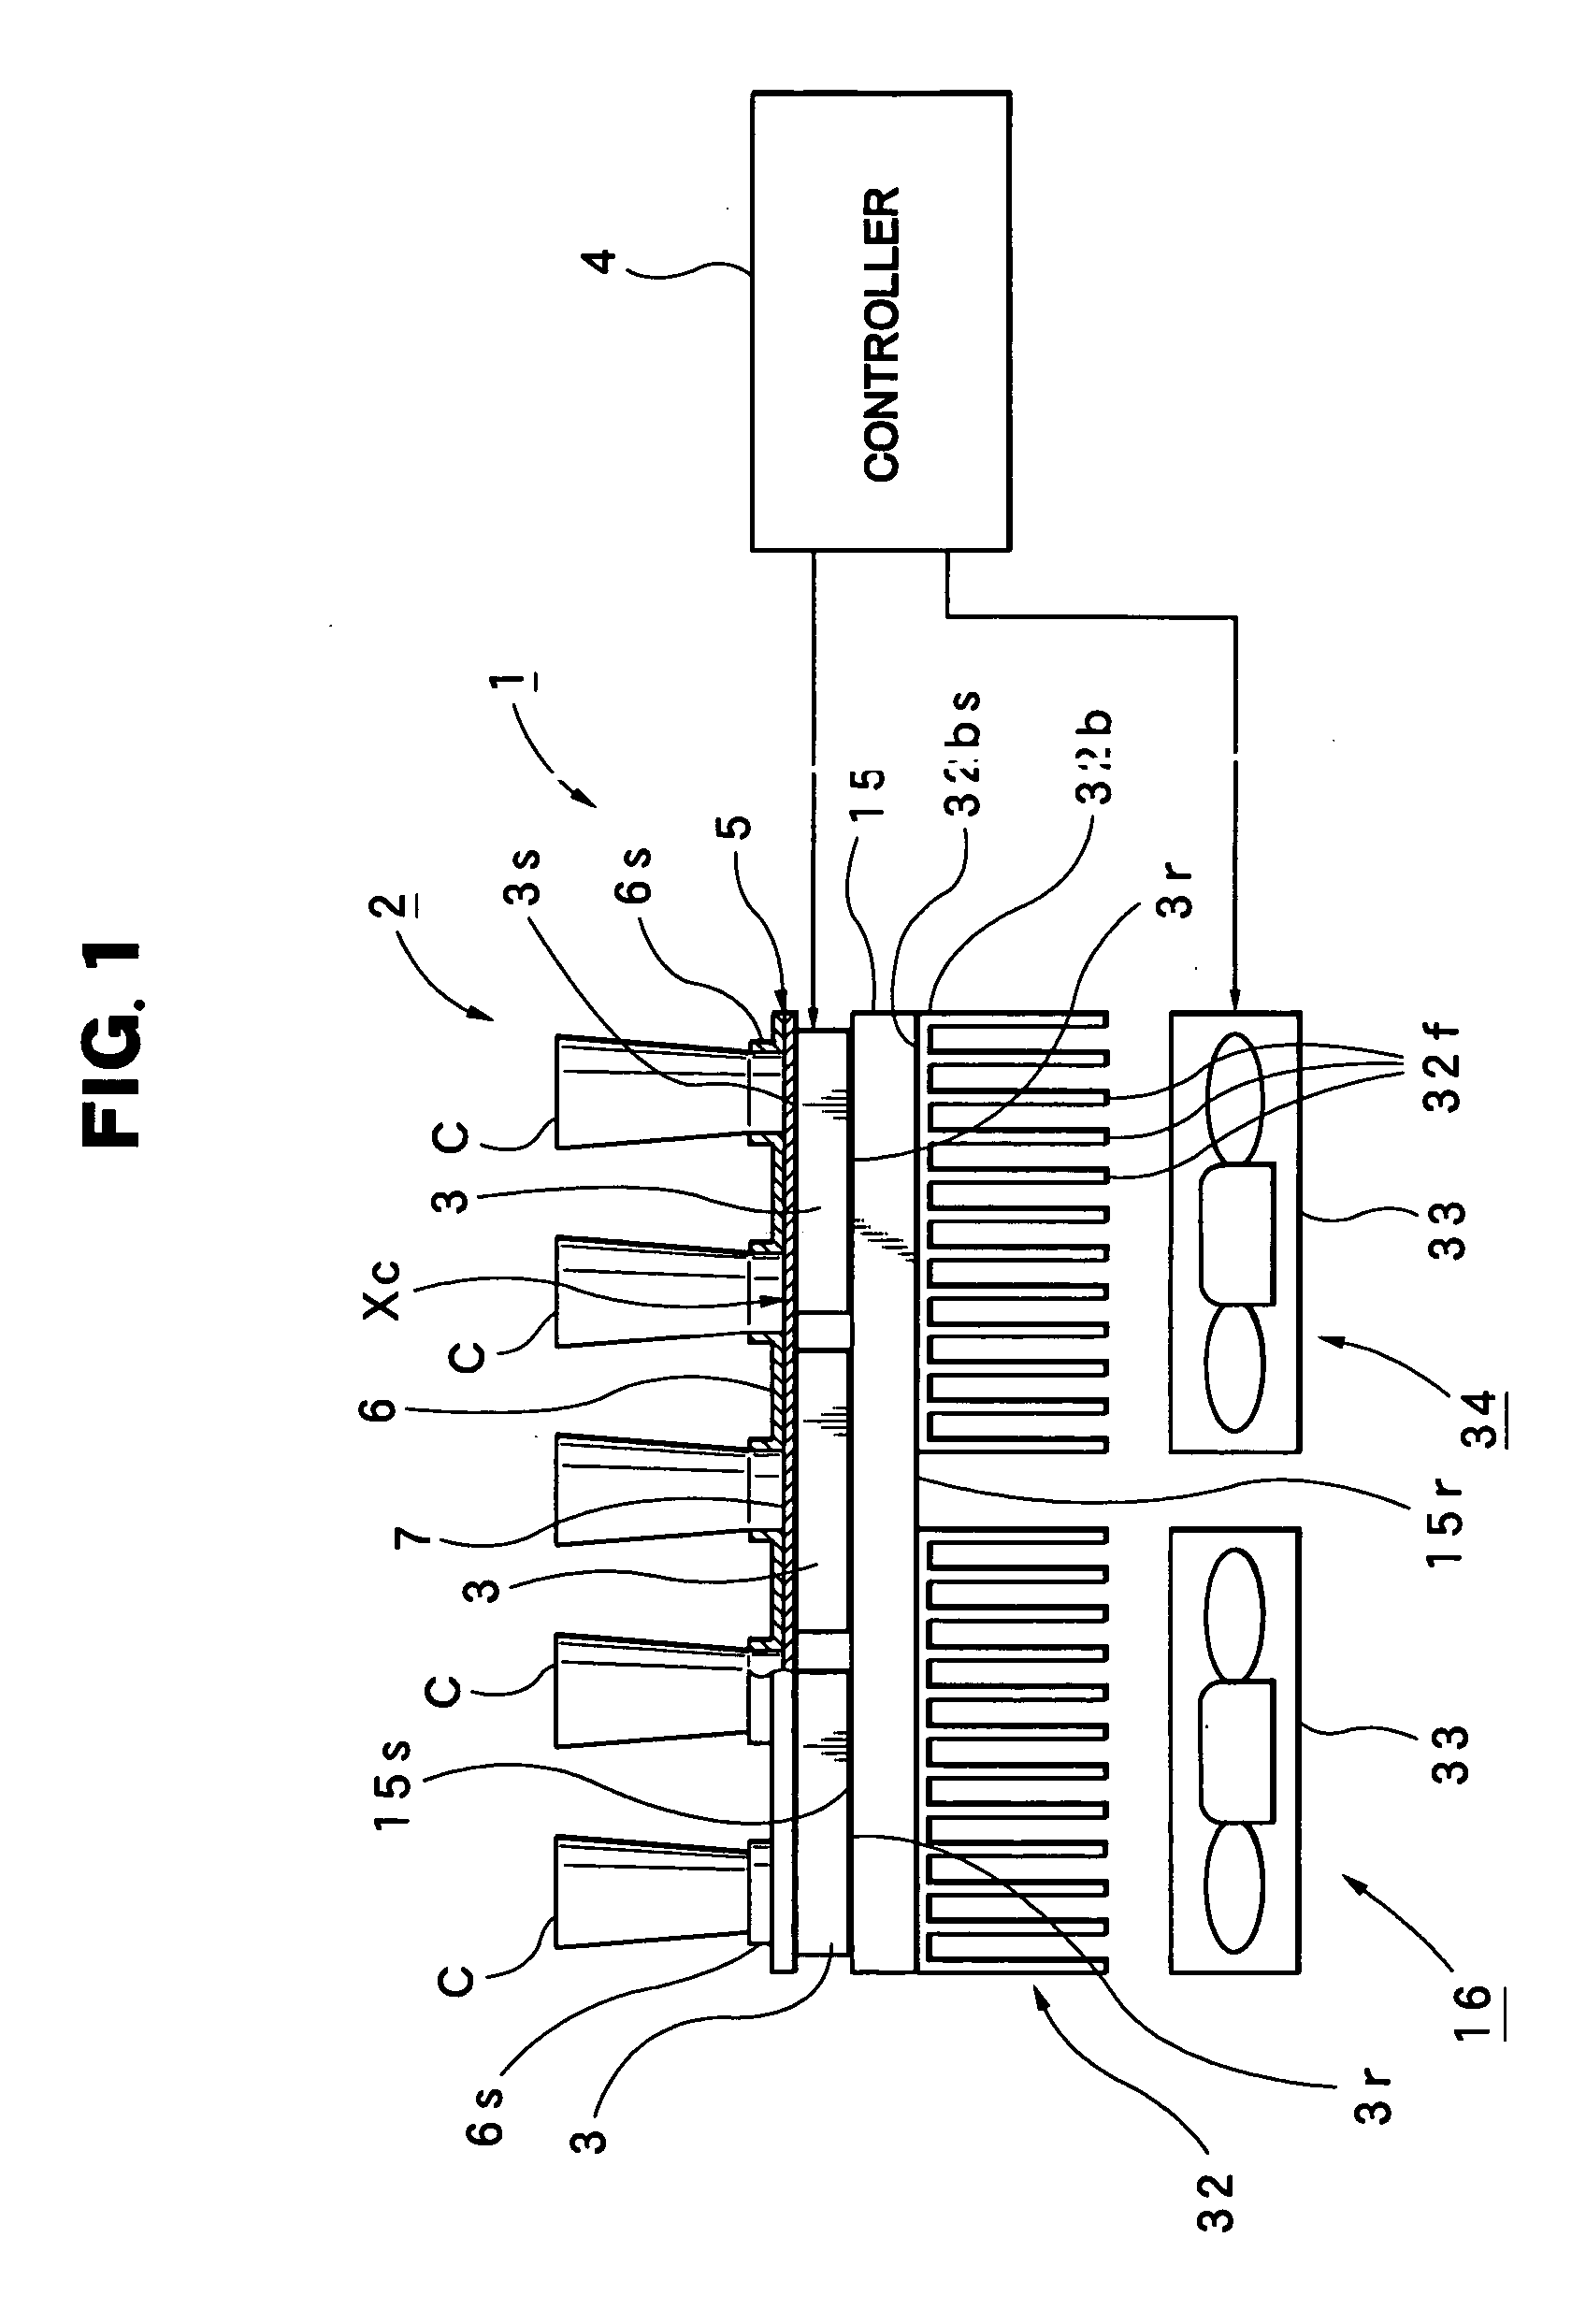 DNA amplification device